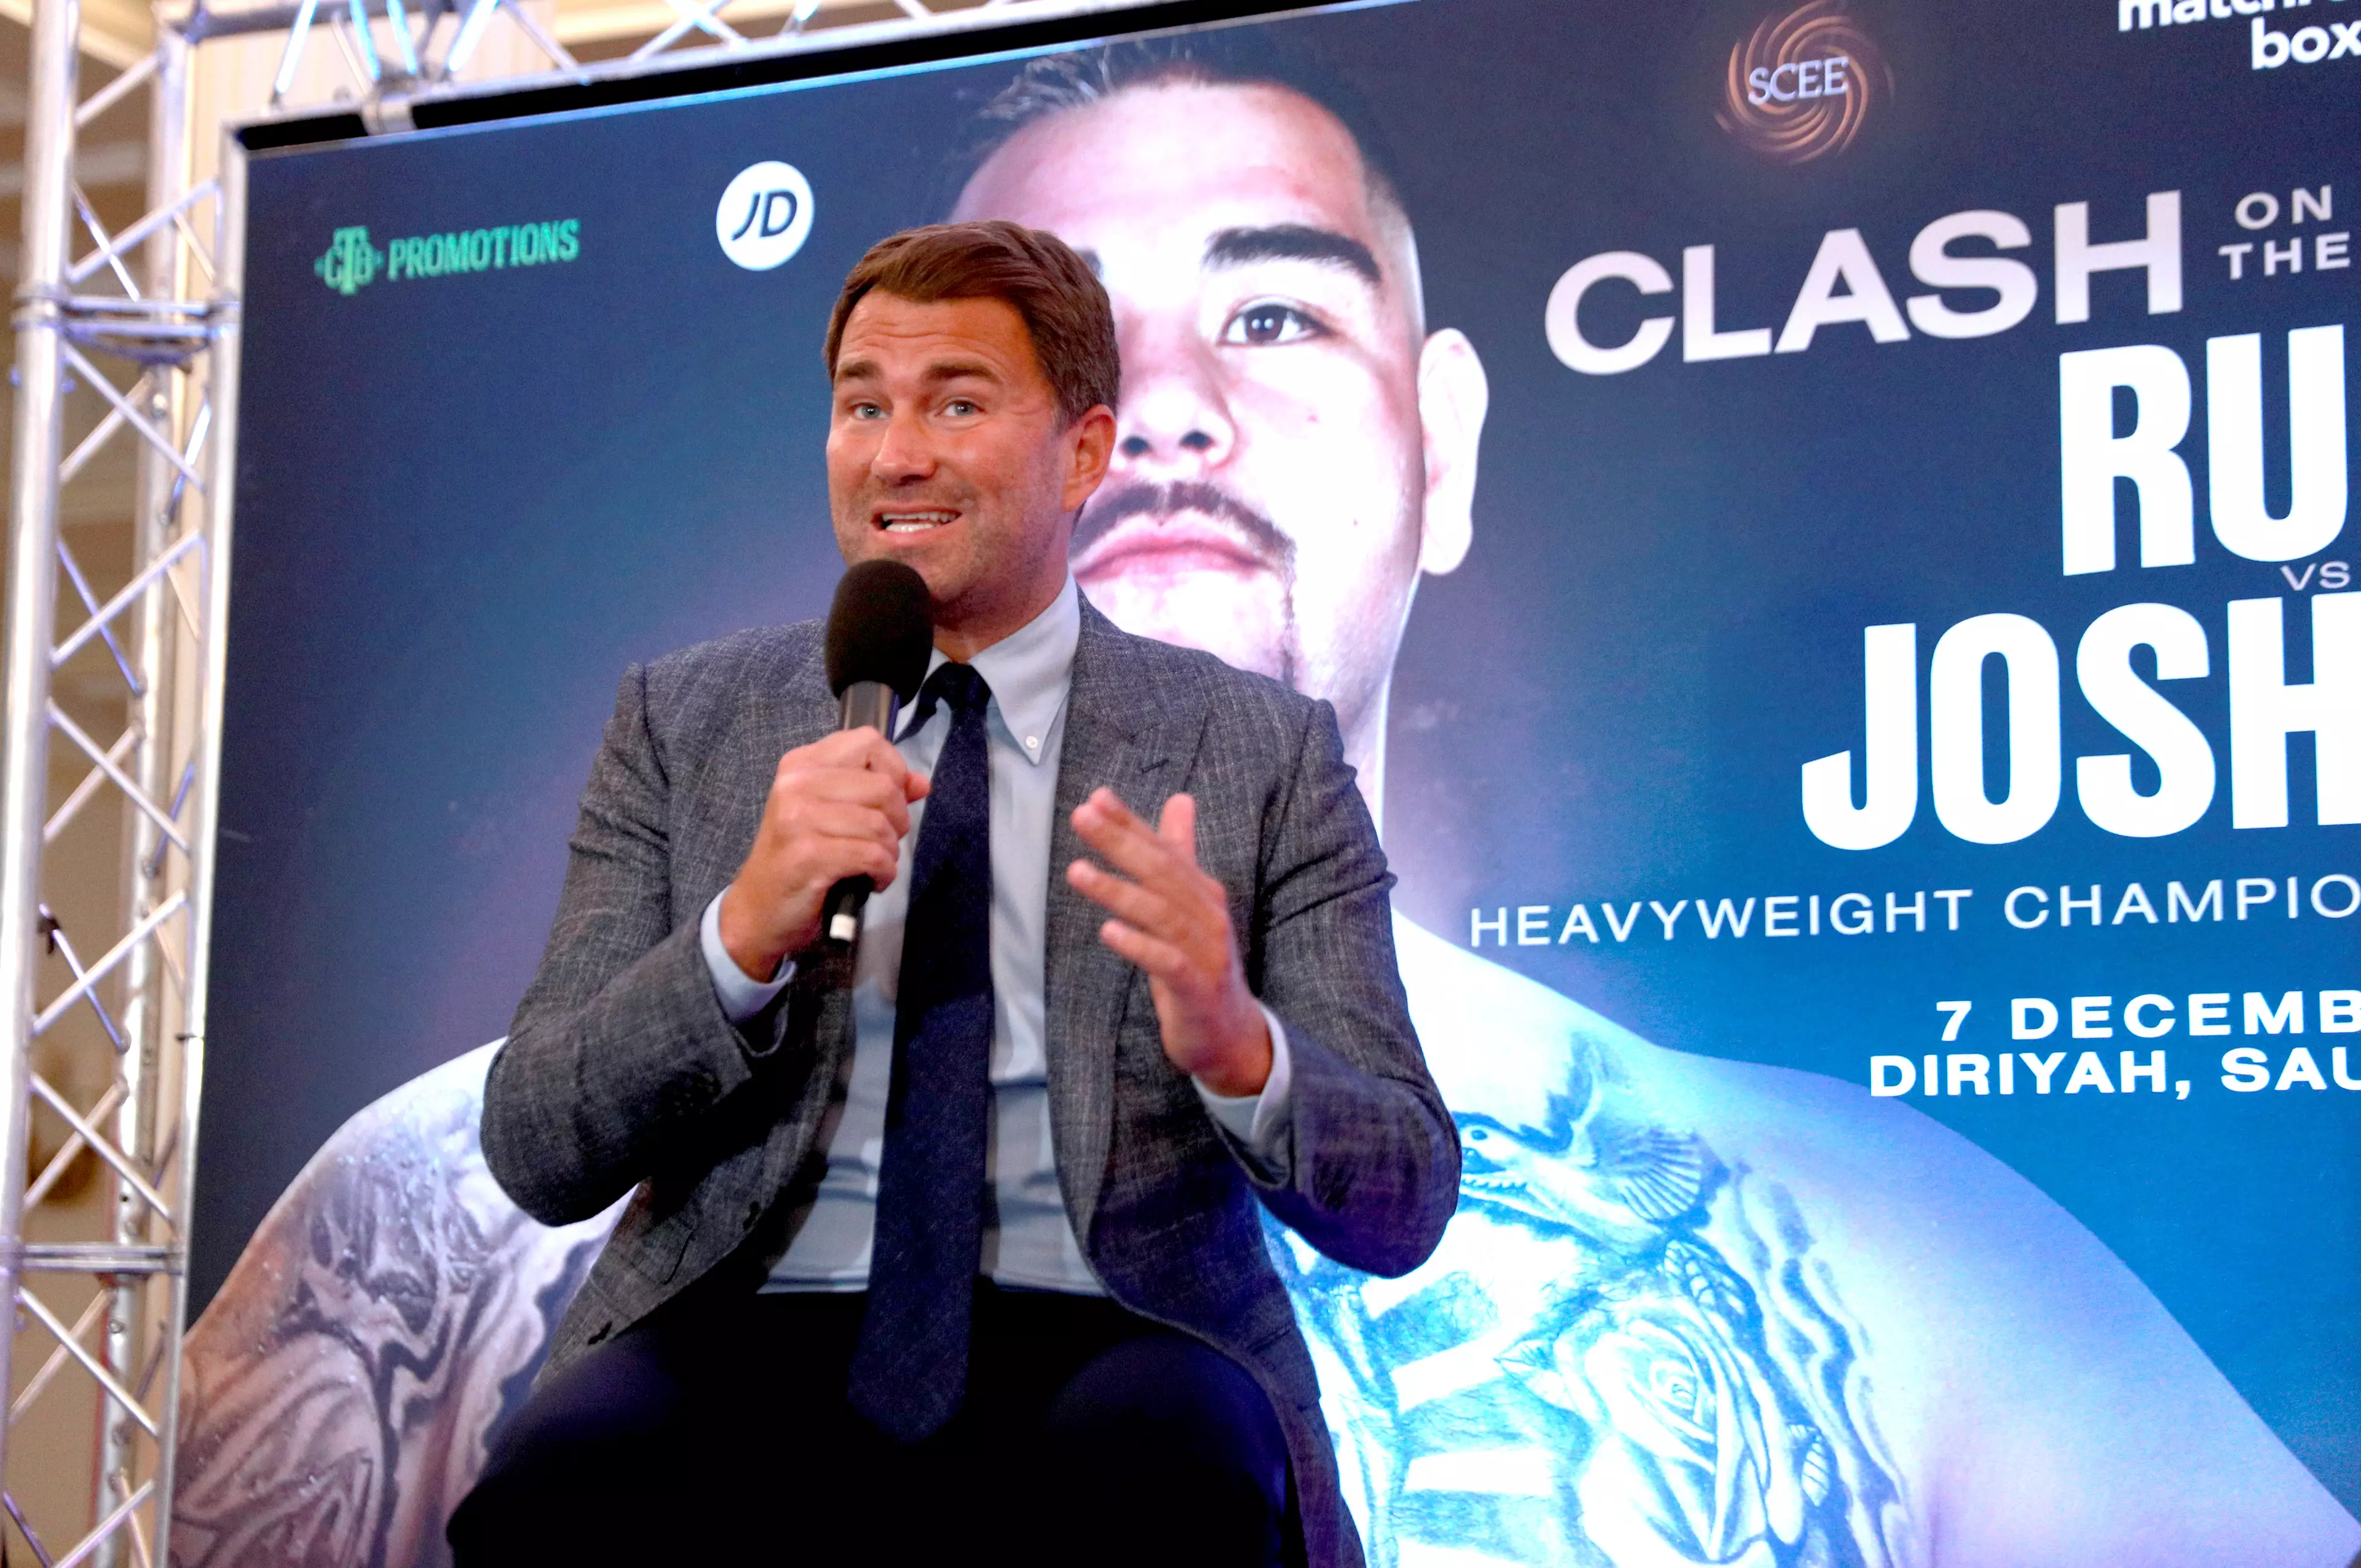 Eddie Hearn hit out at Bob Arum for the popularity of his shows